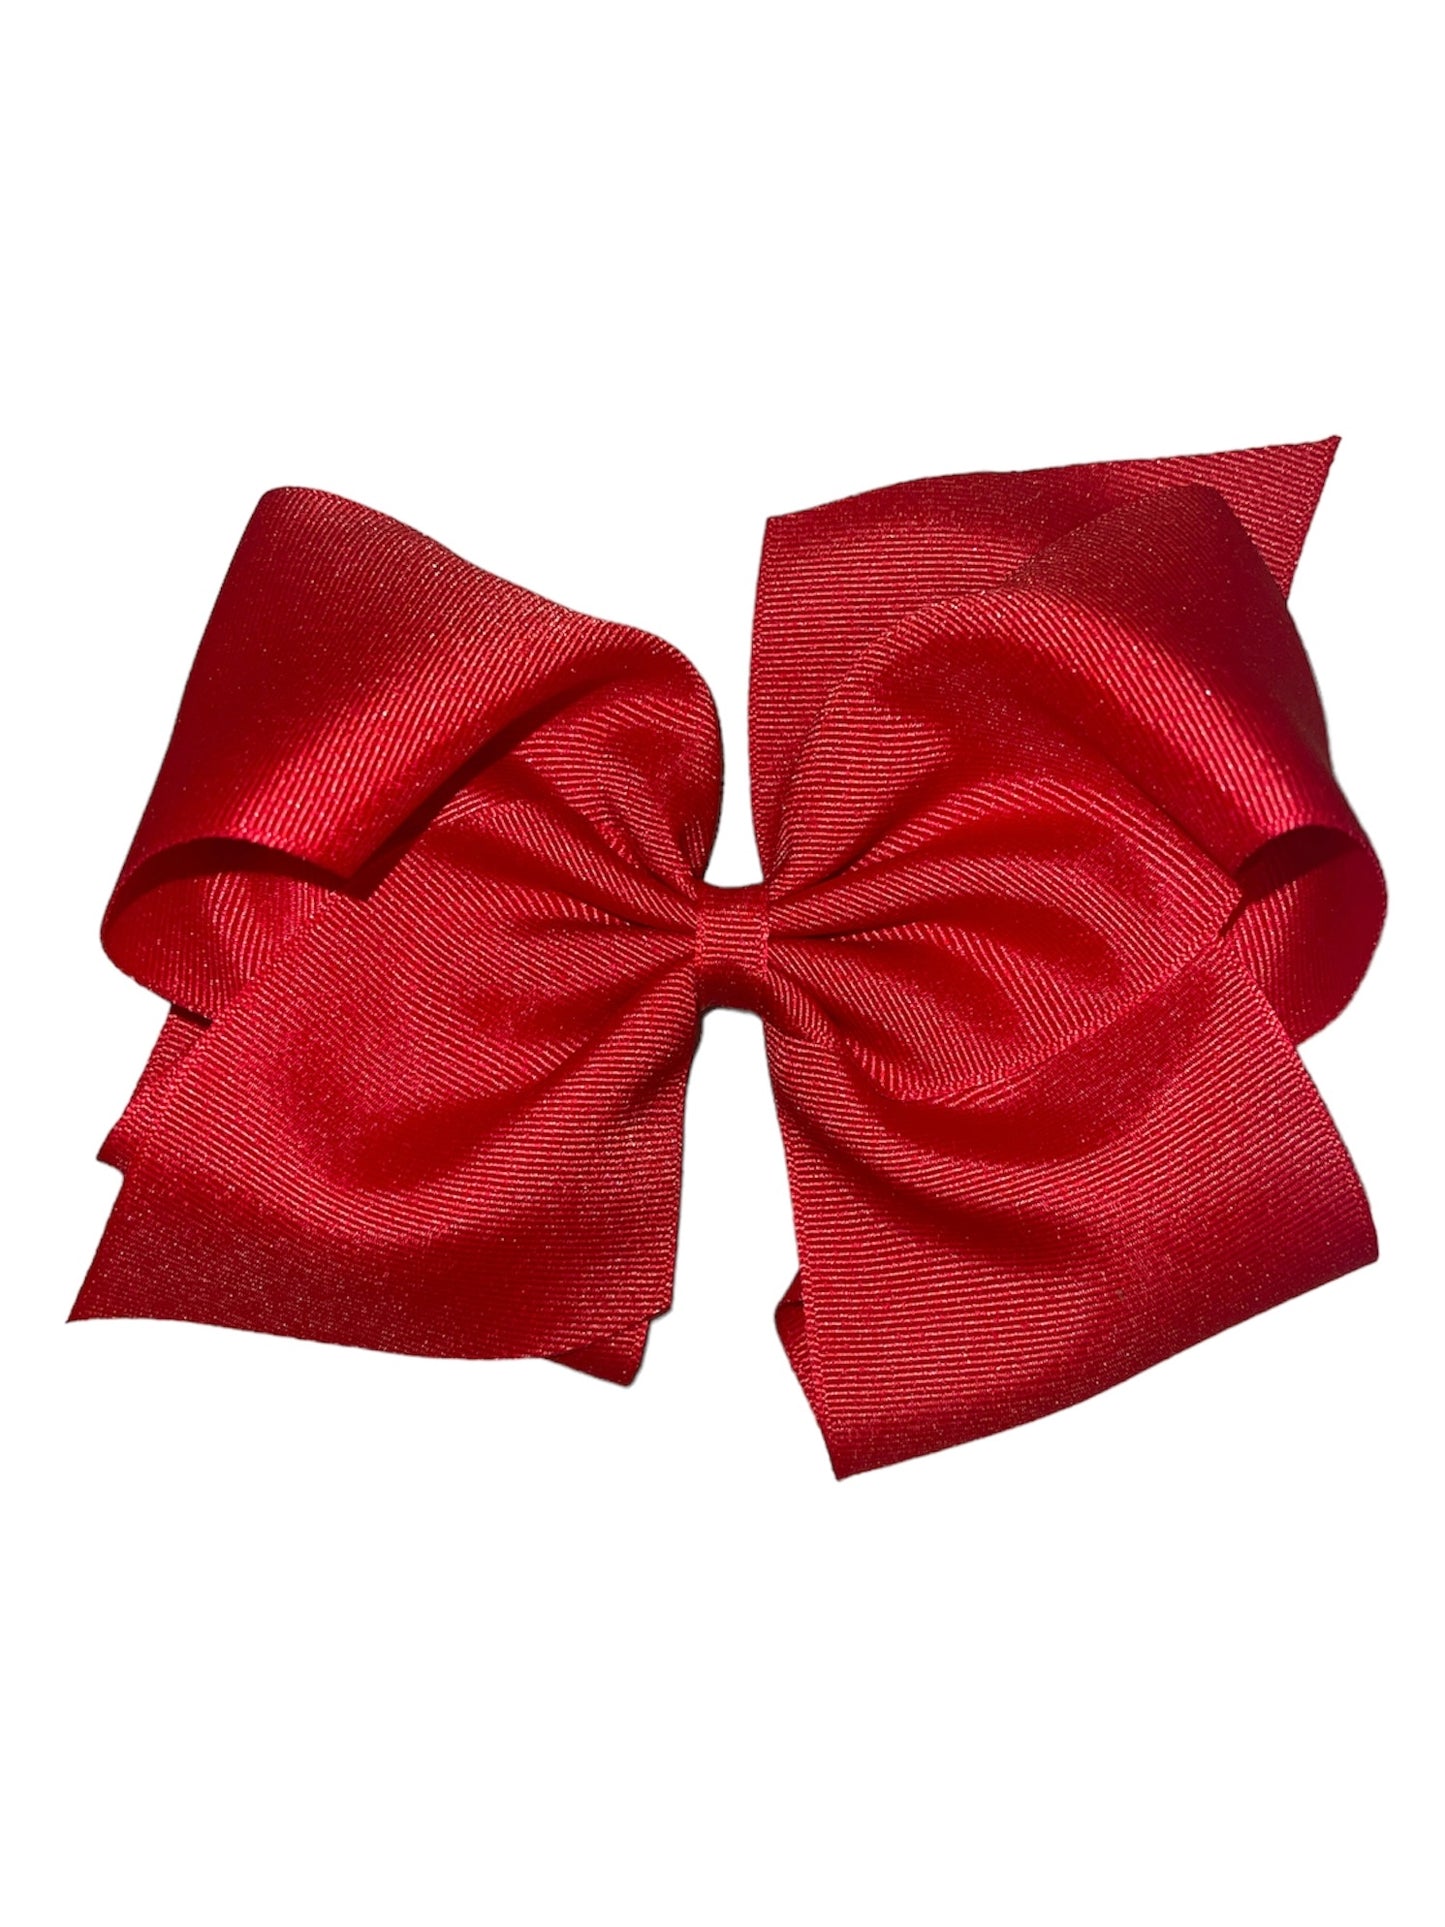 Large Red Bow (HUG)